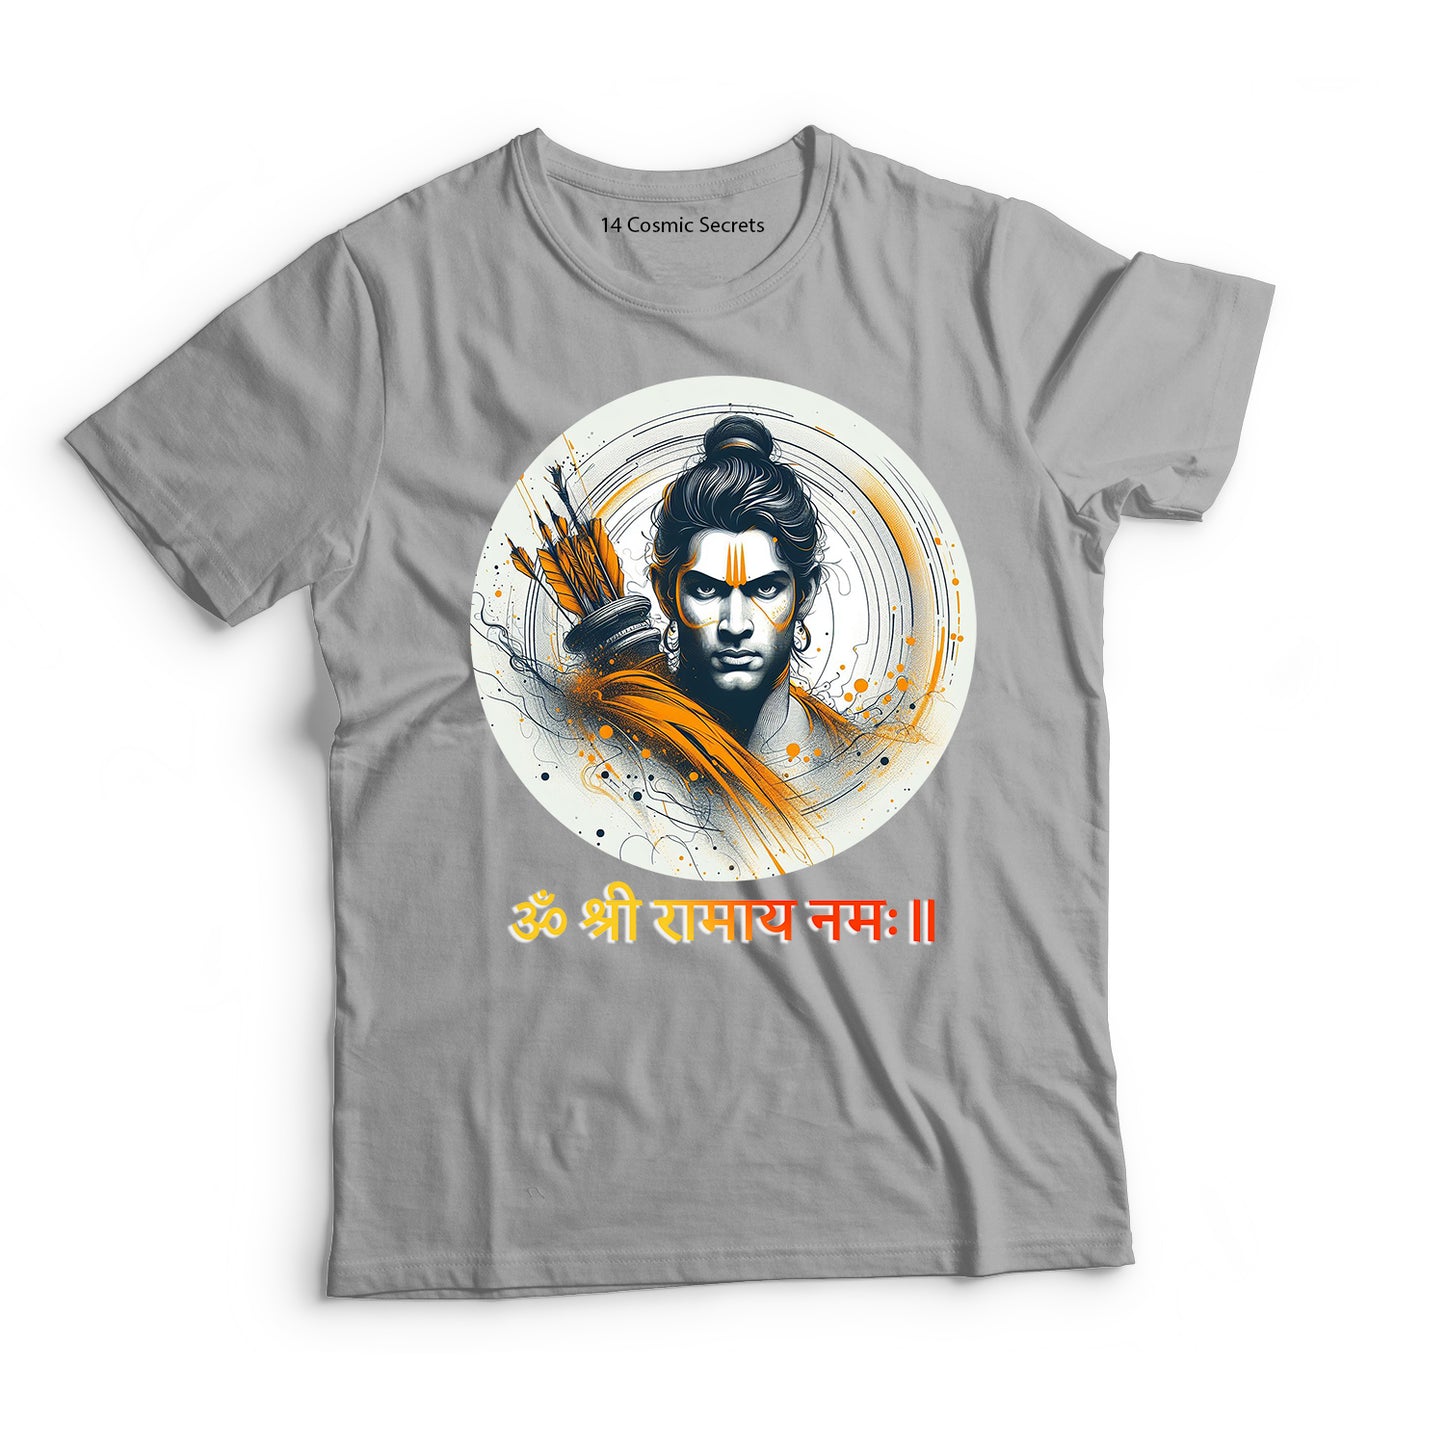 Rama's Wisdom: The Enlightened Leader Graphic Printed T-Shirt for Men Cotton T-Shirt Original Super Heroes of India T-Shirt